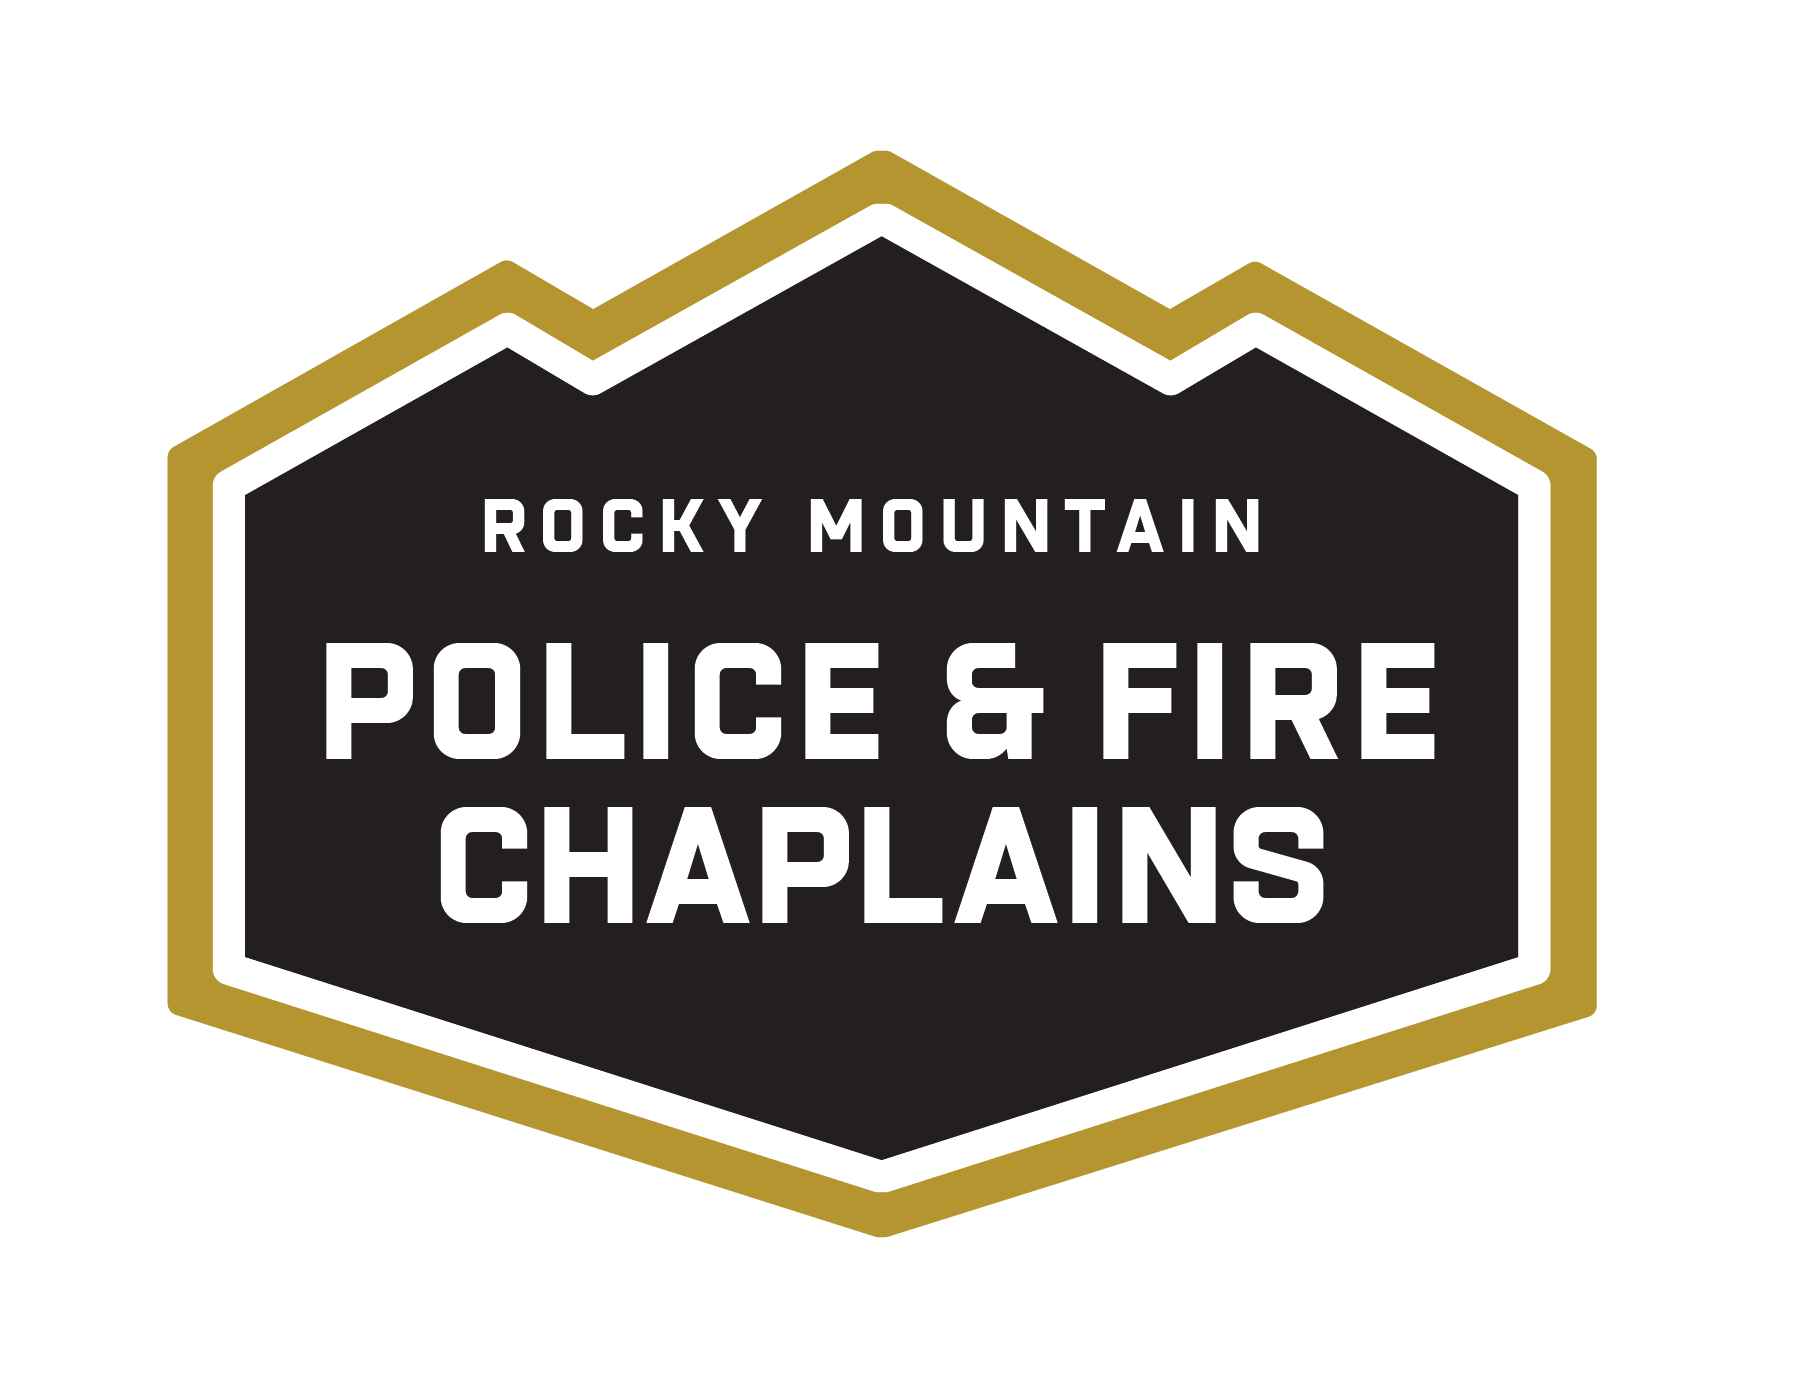 Rocky Mountain Police & Fire Chaplains